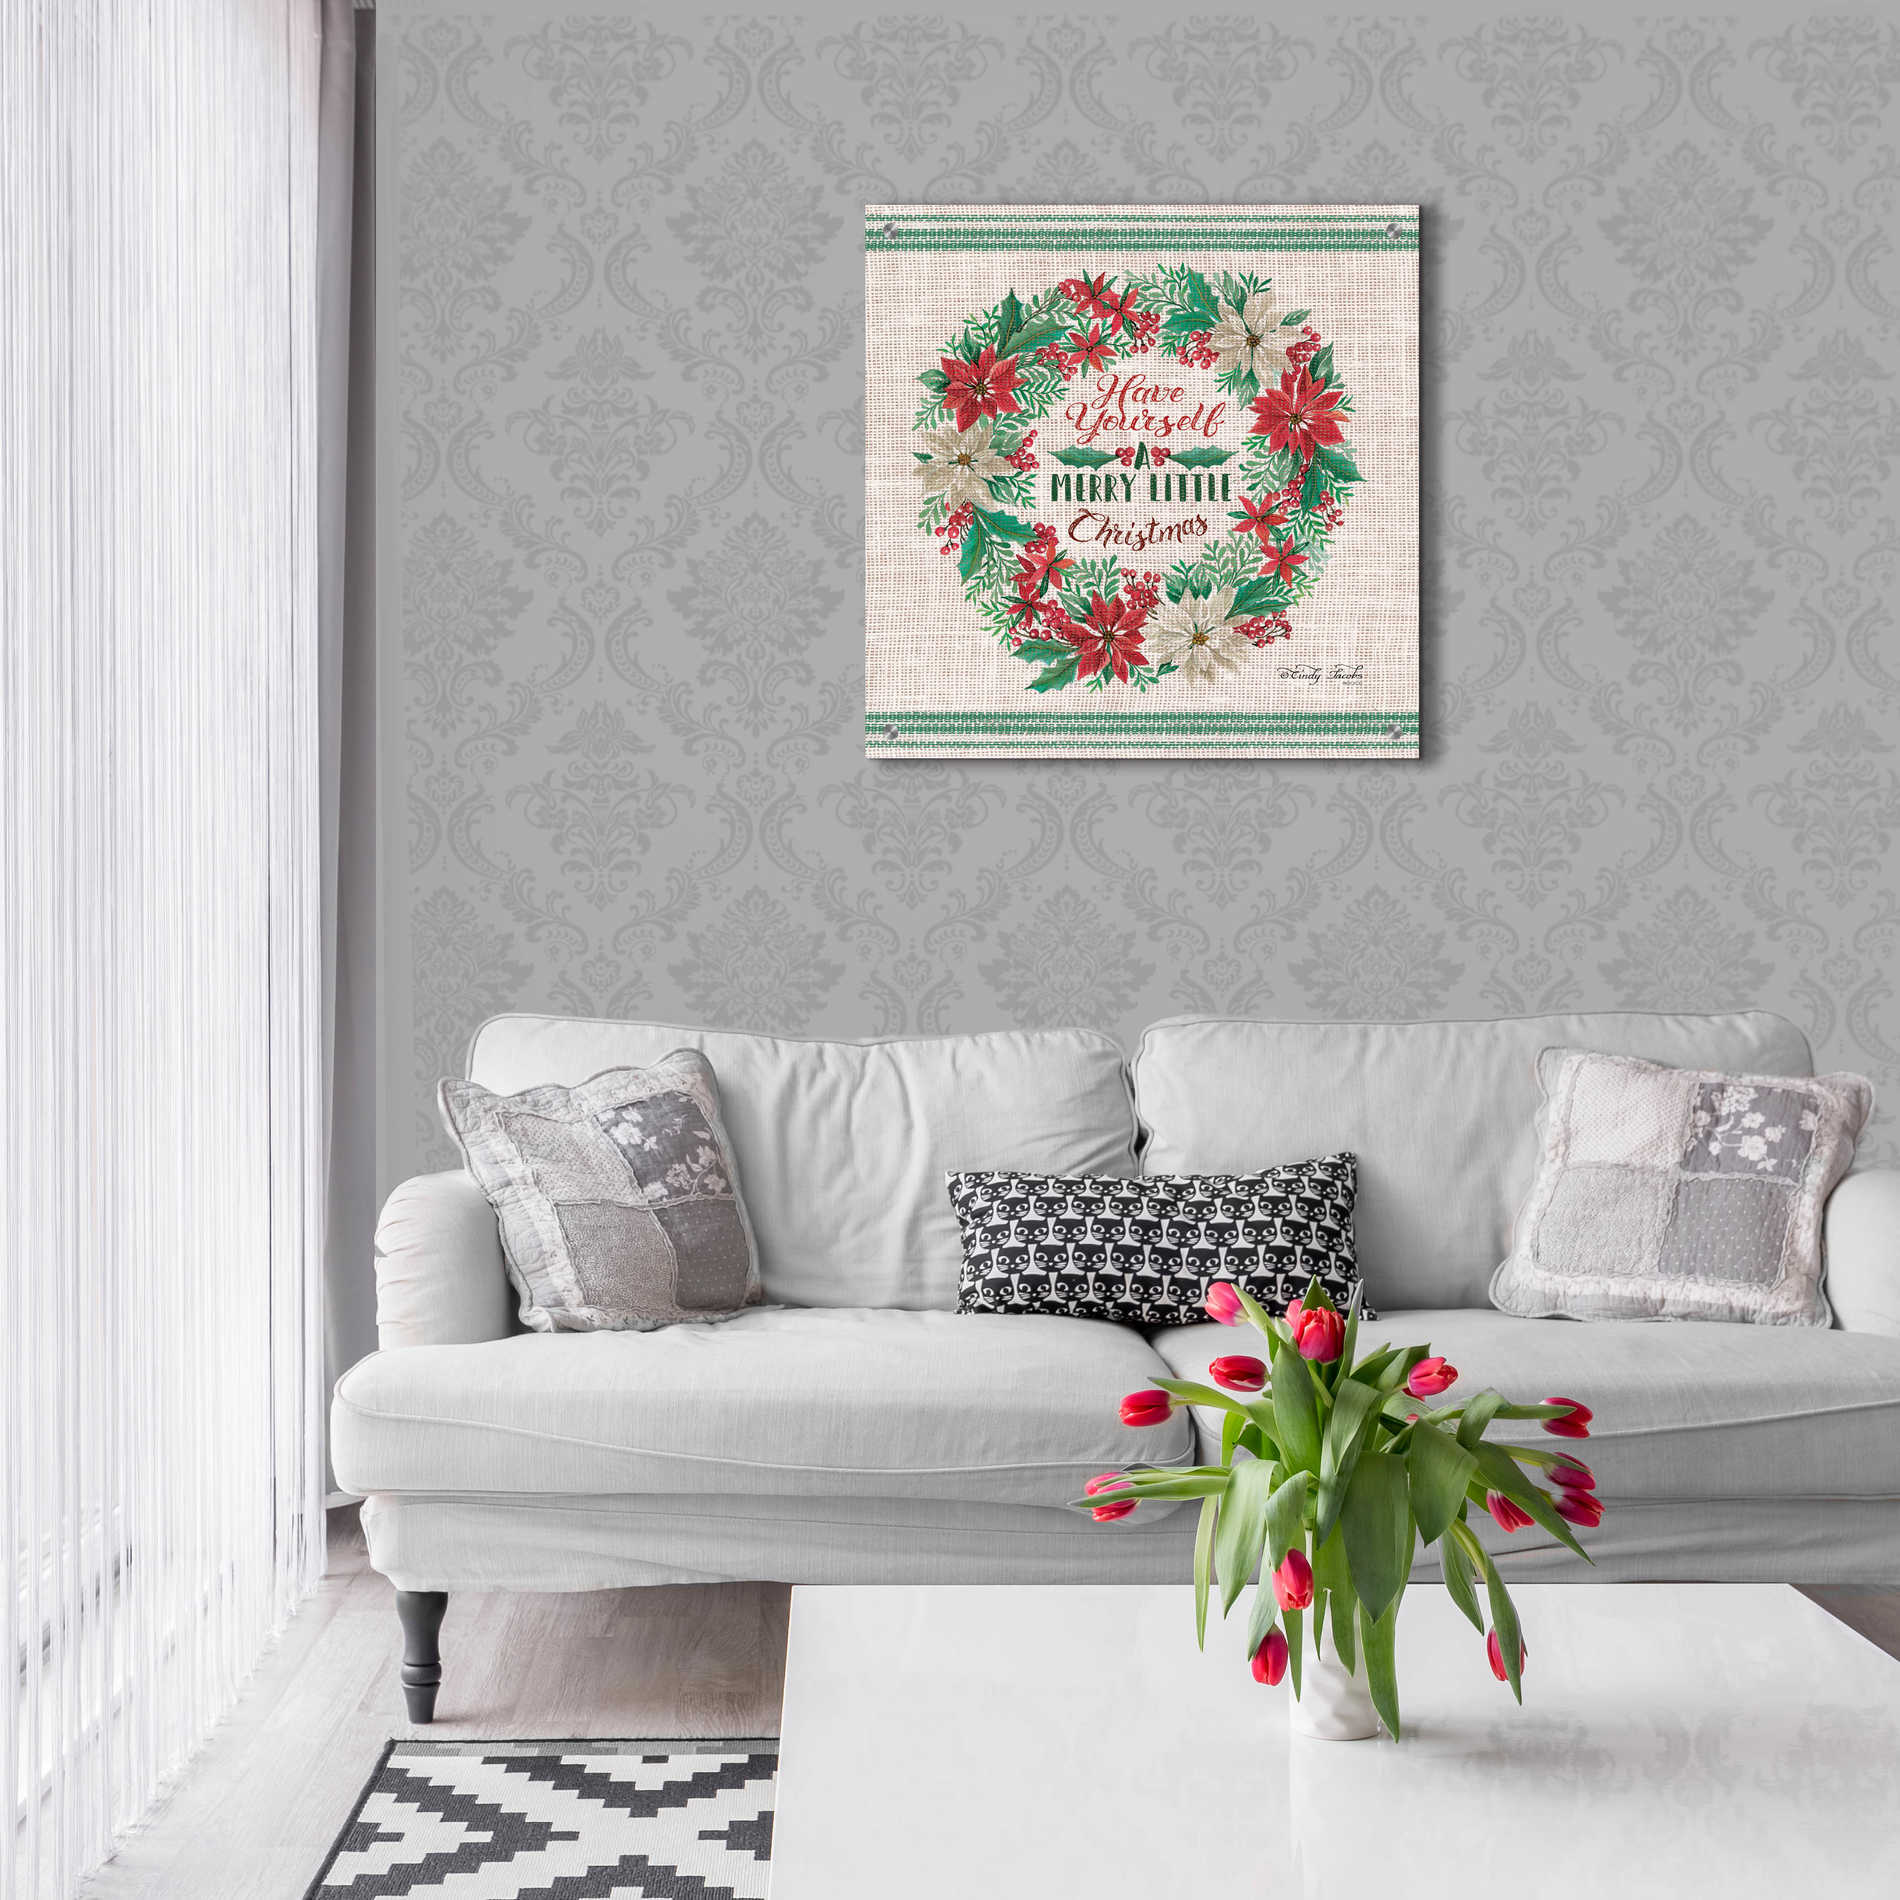 Epic Art 'Have Yourself a Merry Little Christmas Embroidery' by Cindy Jacobs, Acrylic Glass Wall Art,24x24